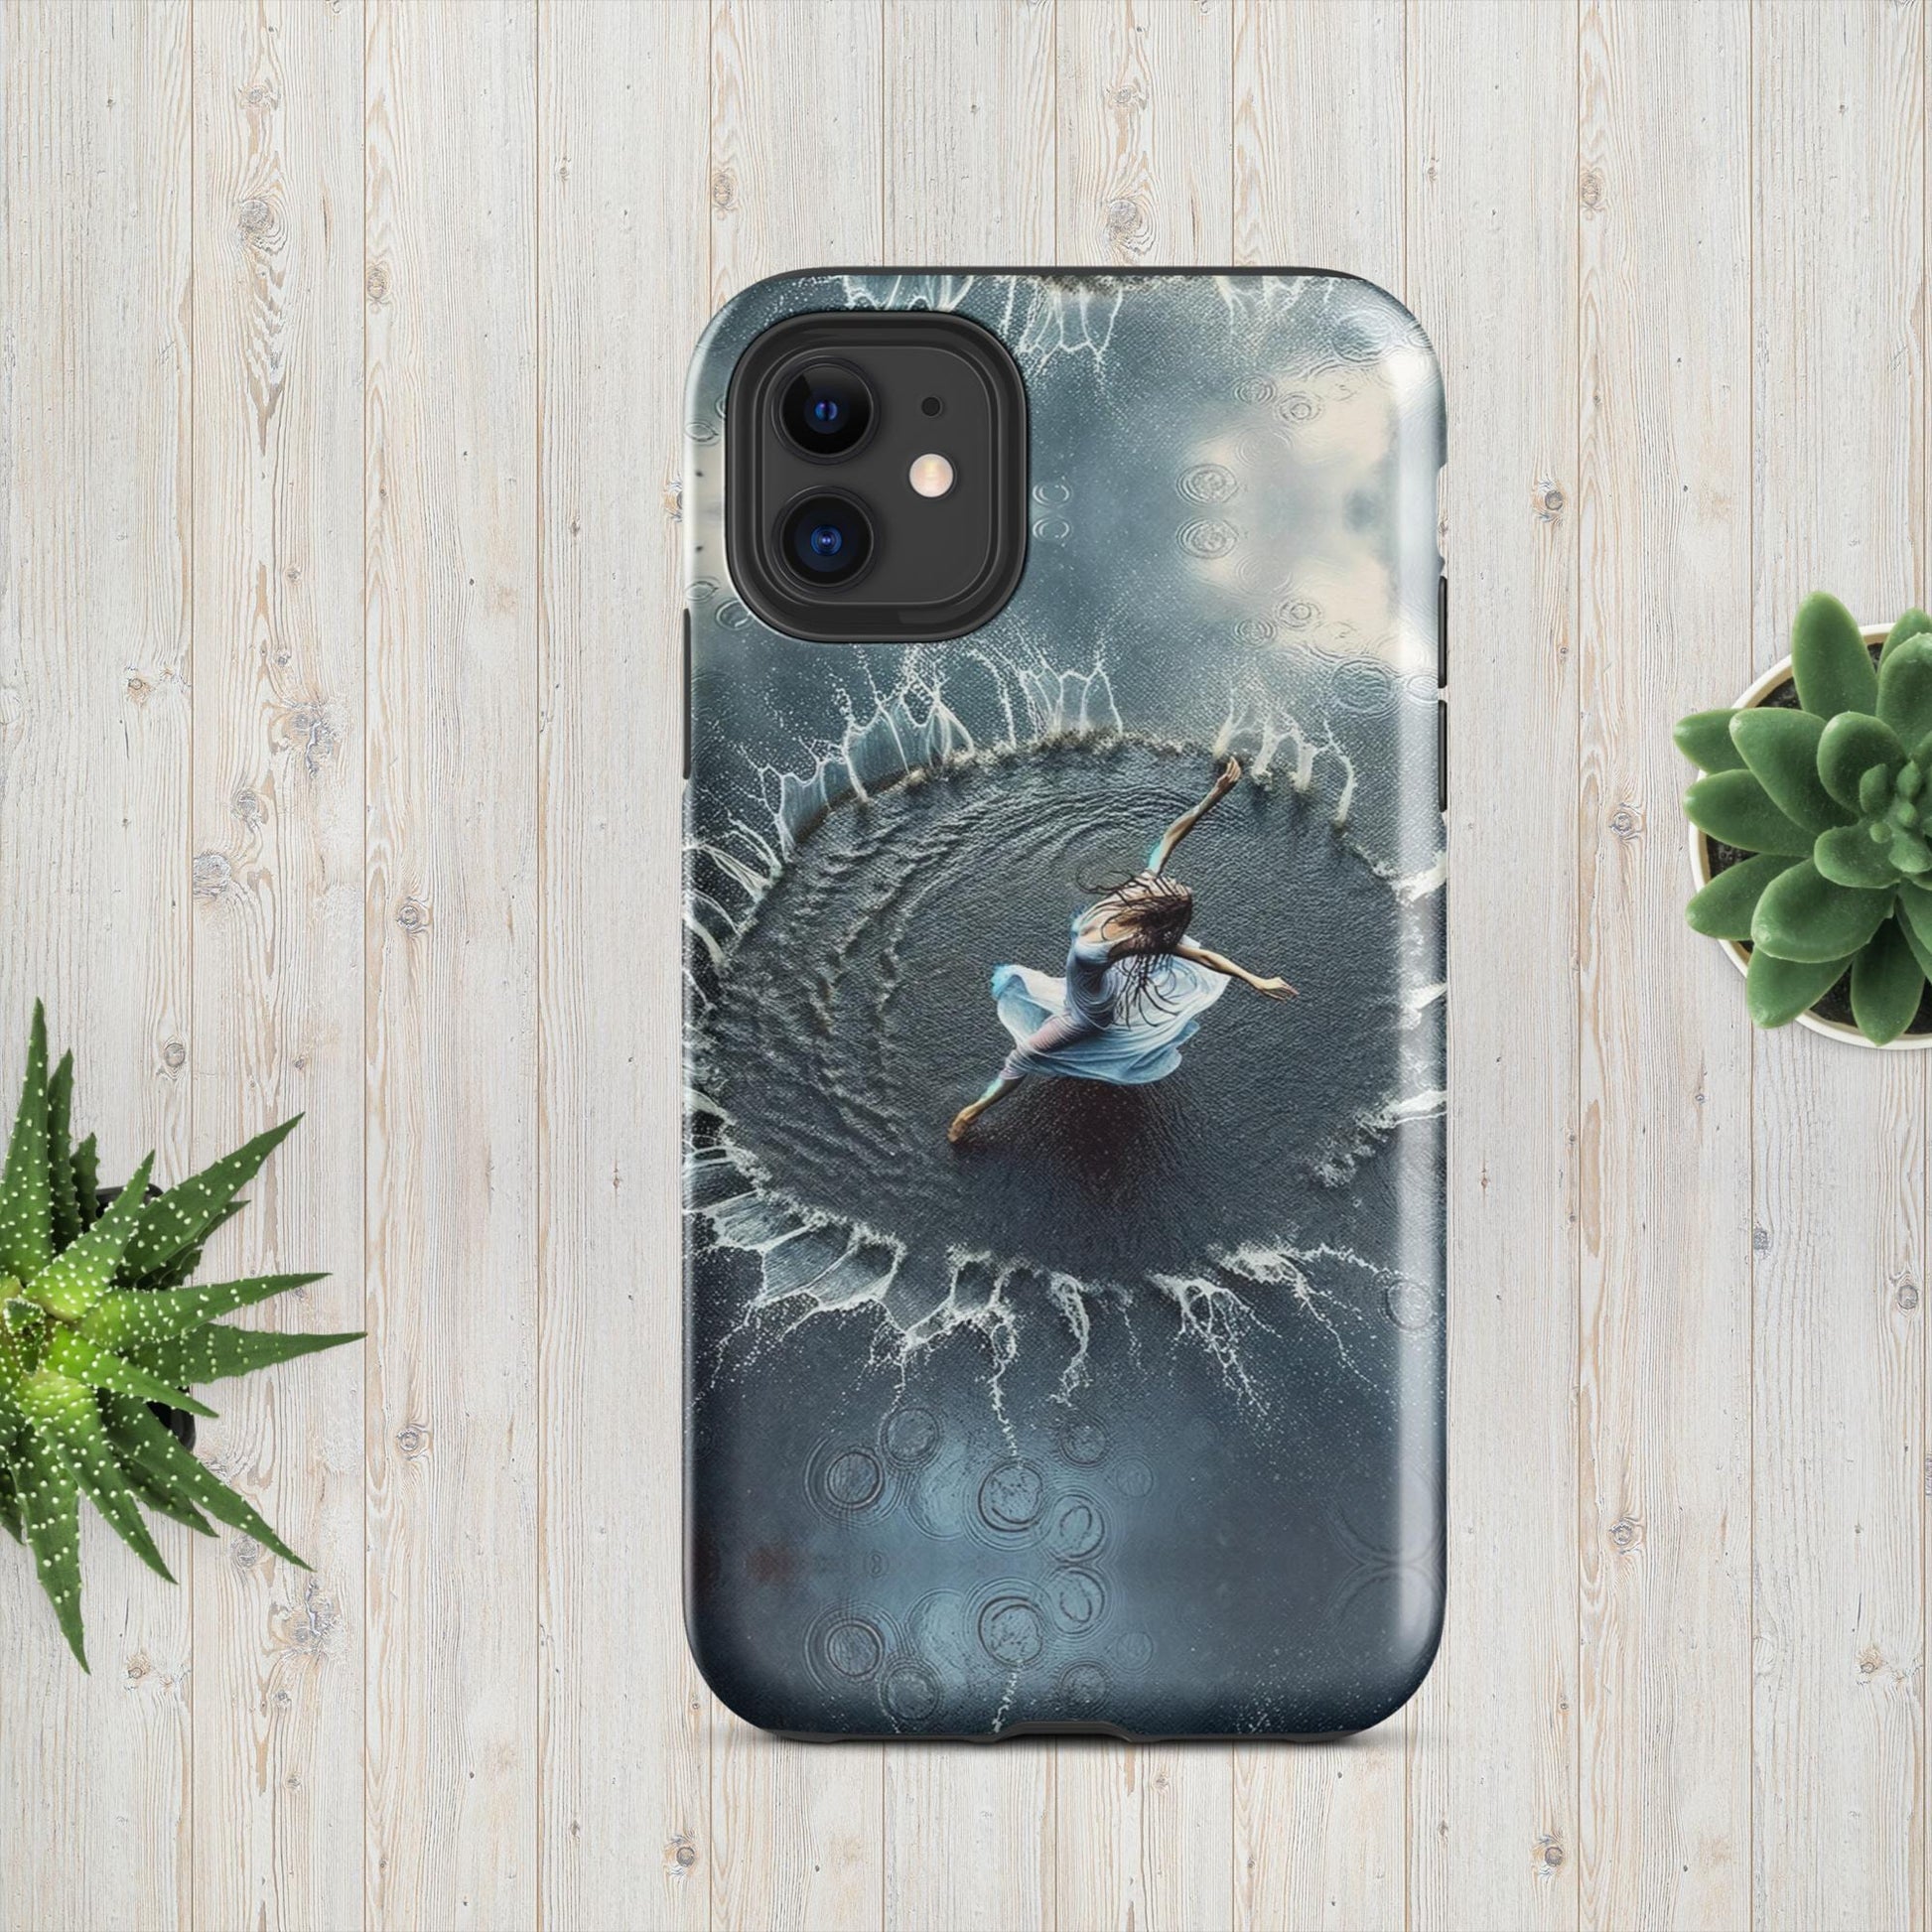 The Hologram Hook Up Glossy / iPhone 11 Puddle Dance Tough Case for iPhone®